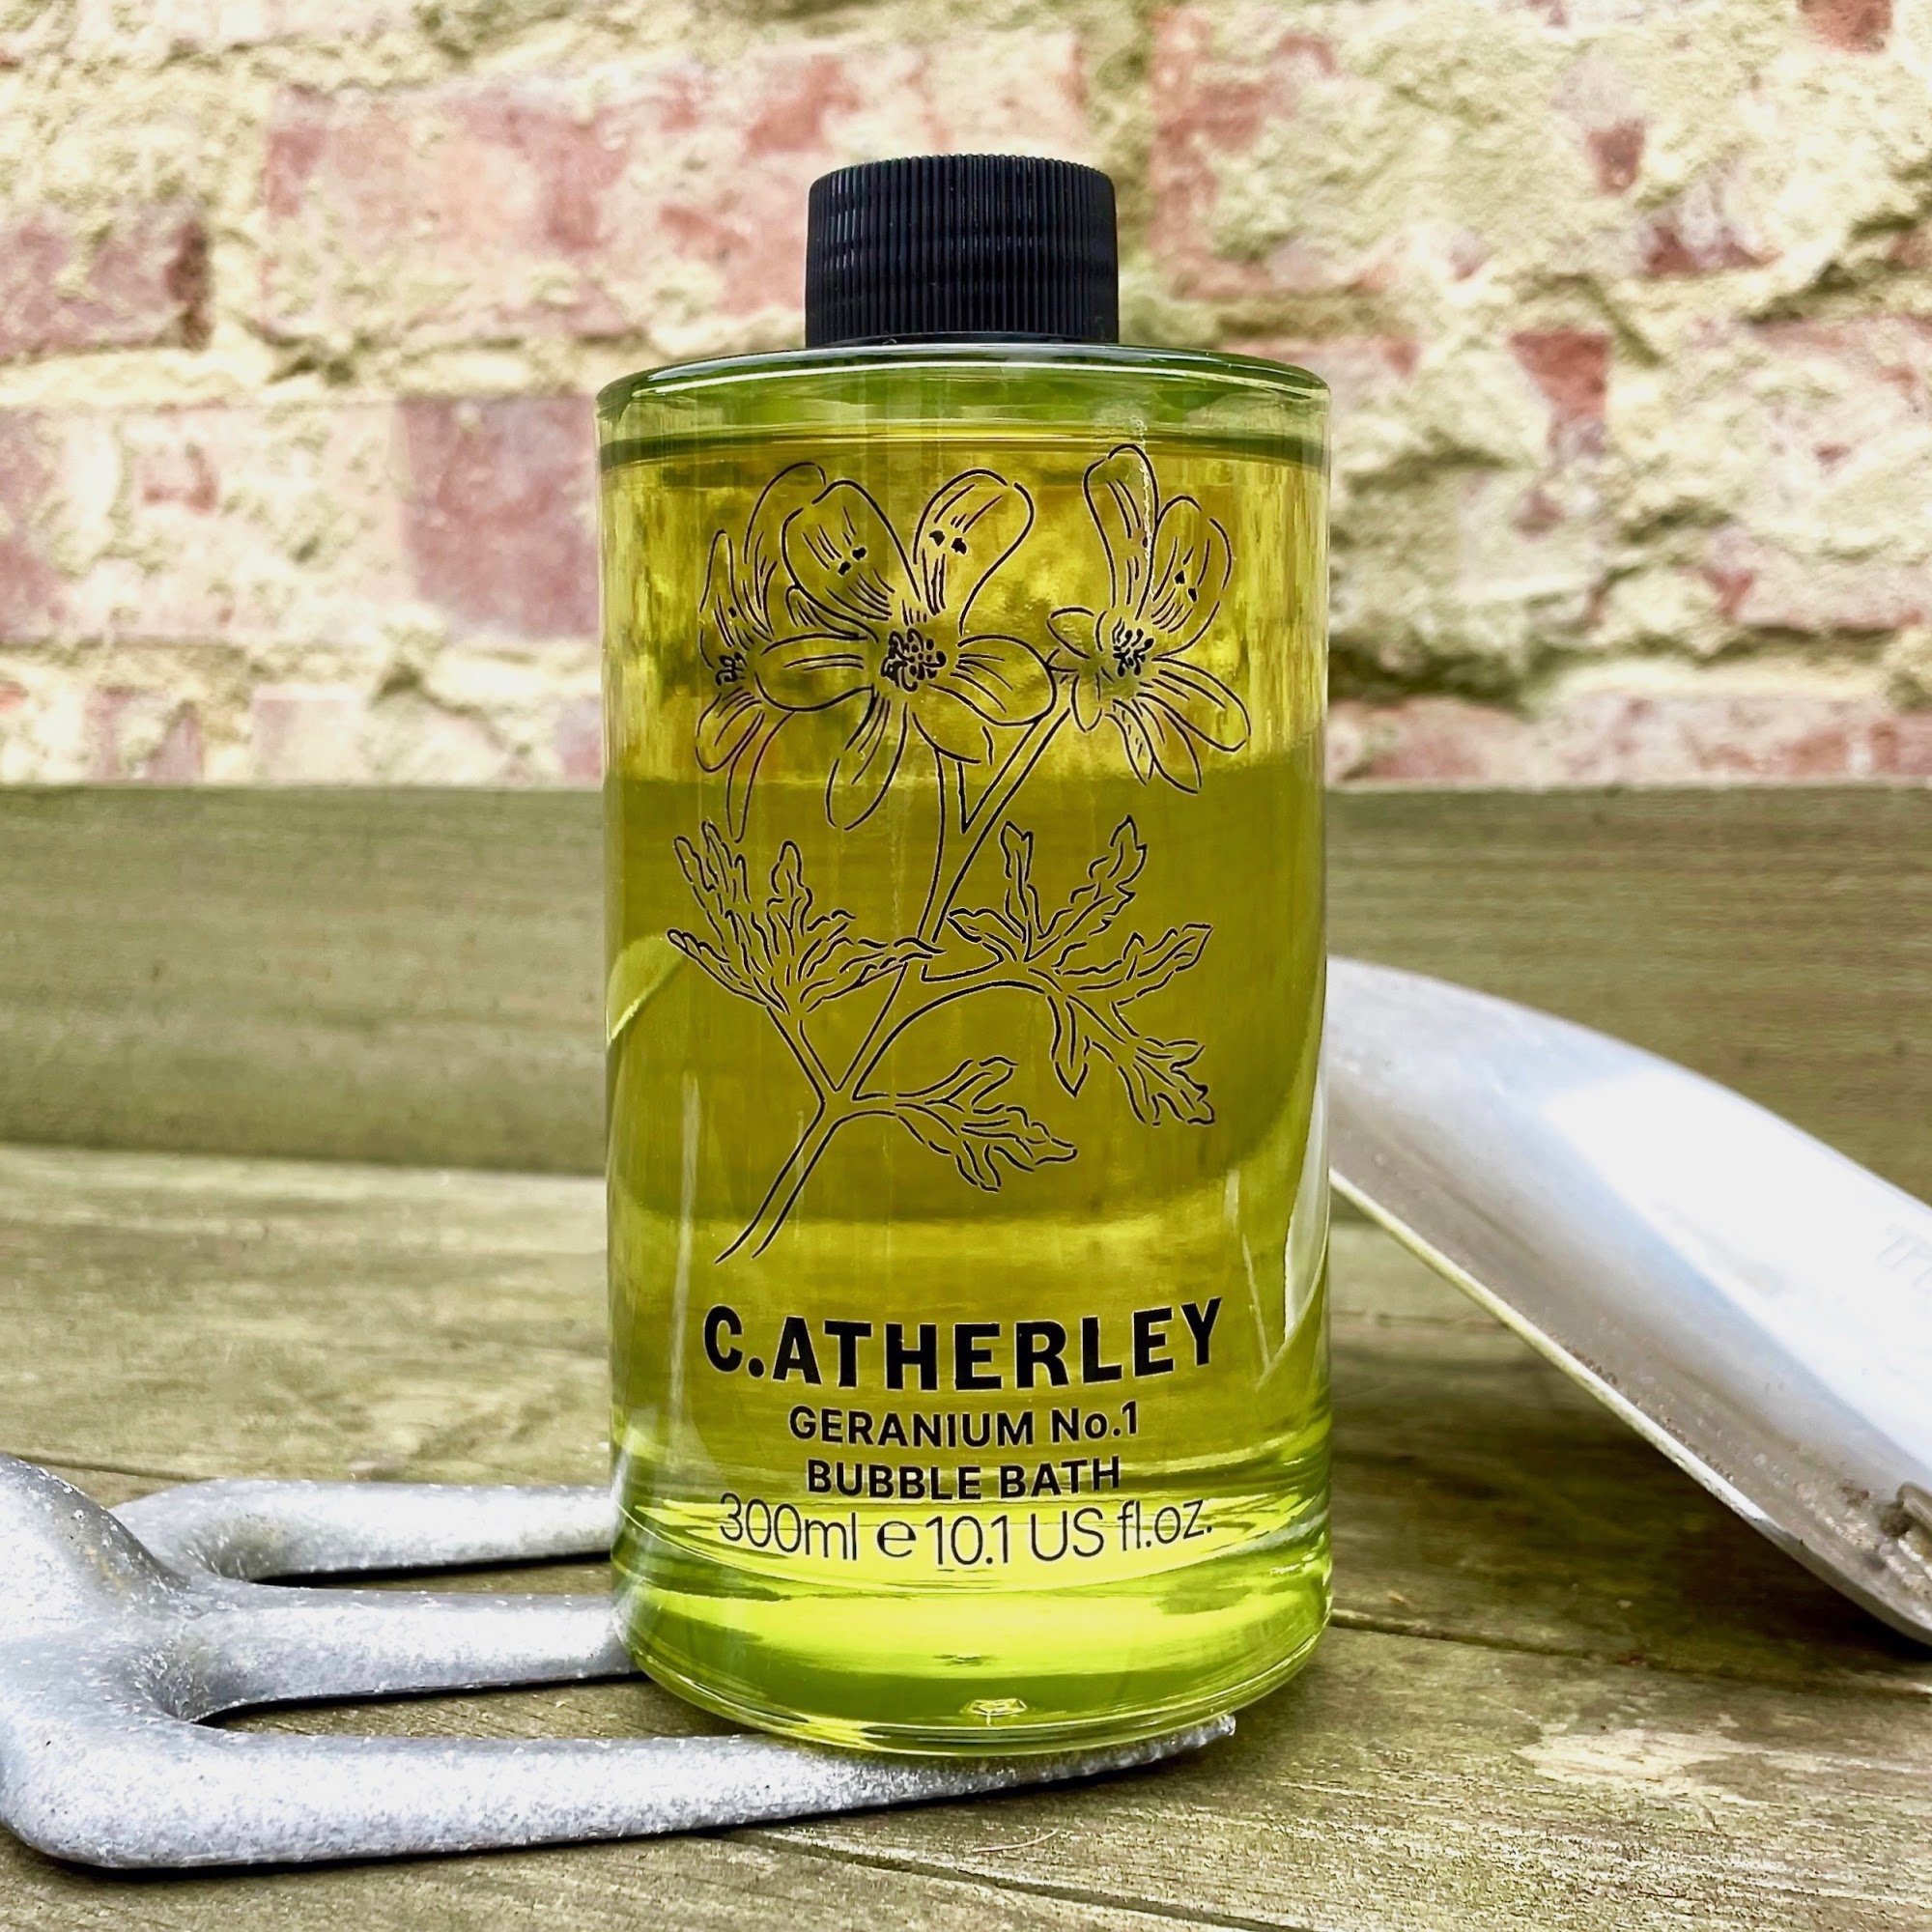 A bottle of Geranium No.1 Bubble Bath from C.Atherley, the new company from Cath Kidston Padgham and Heathcote & Ivory